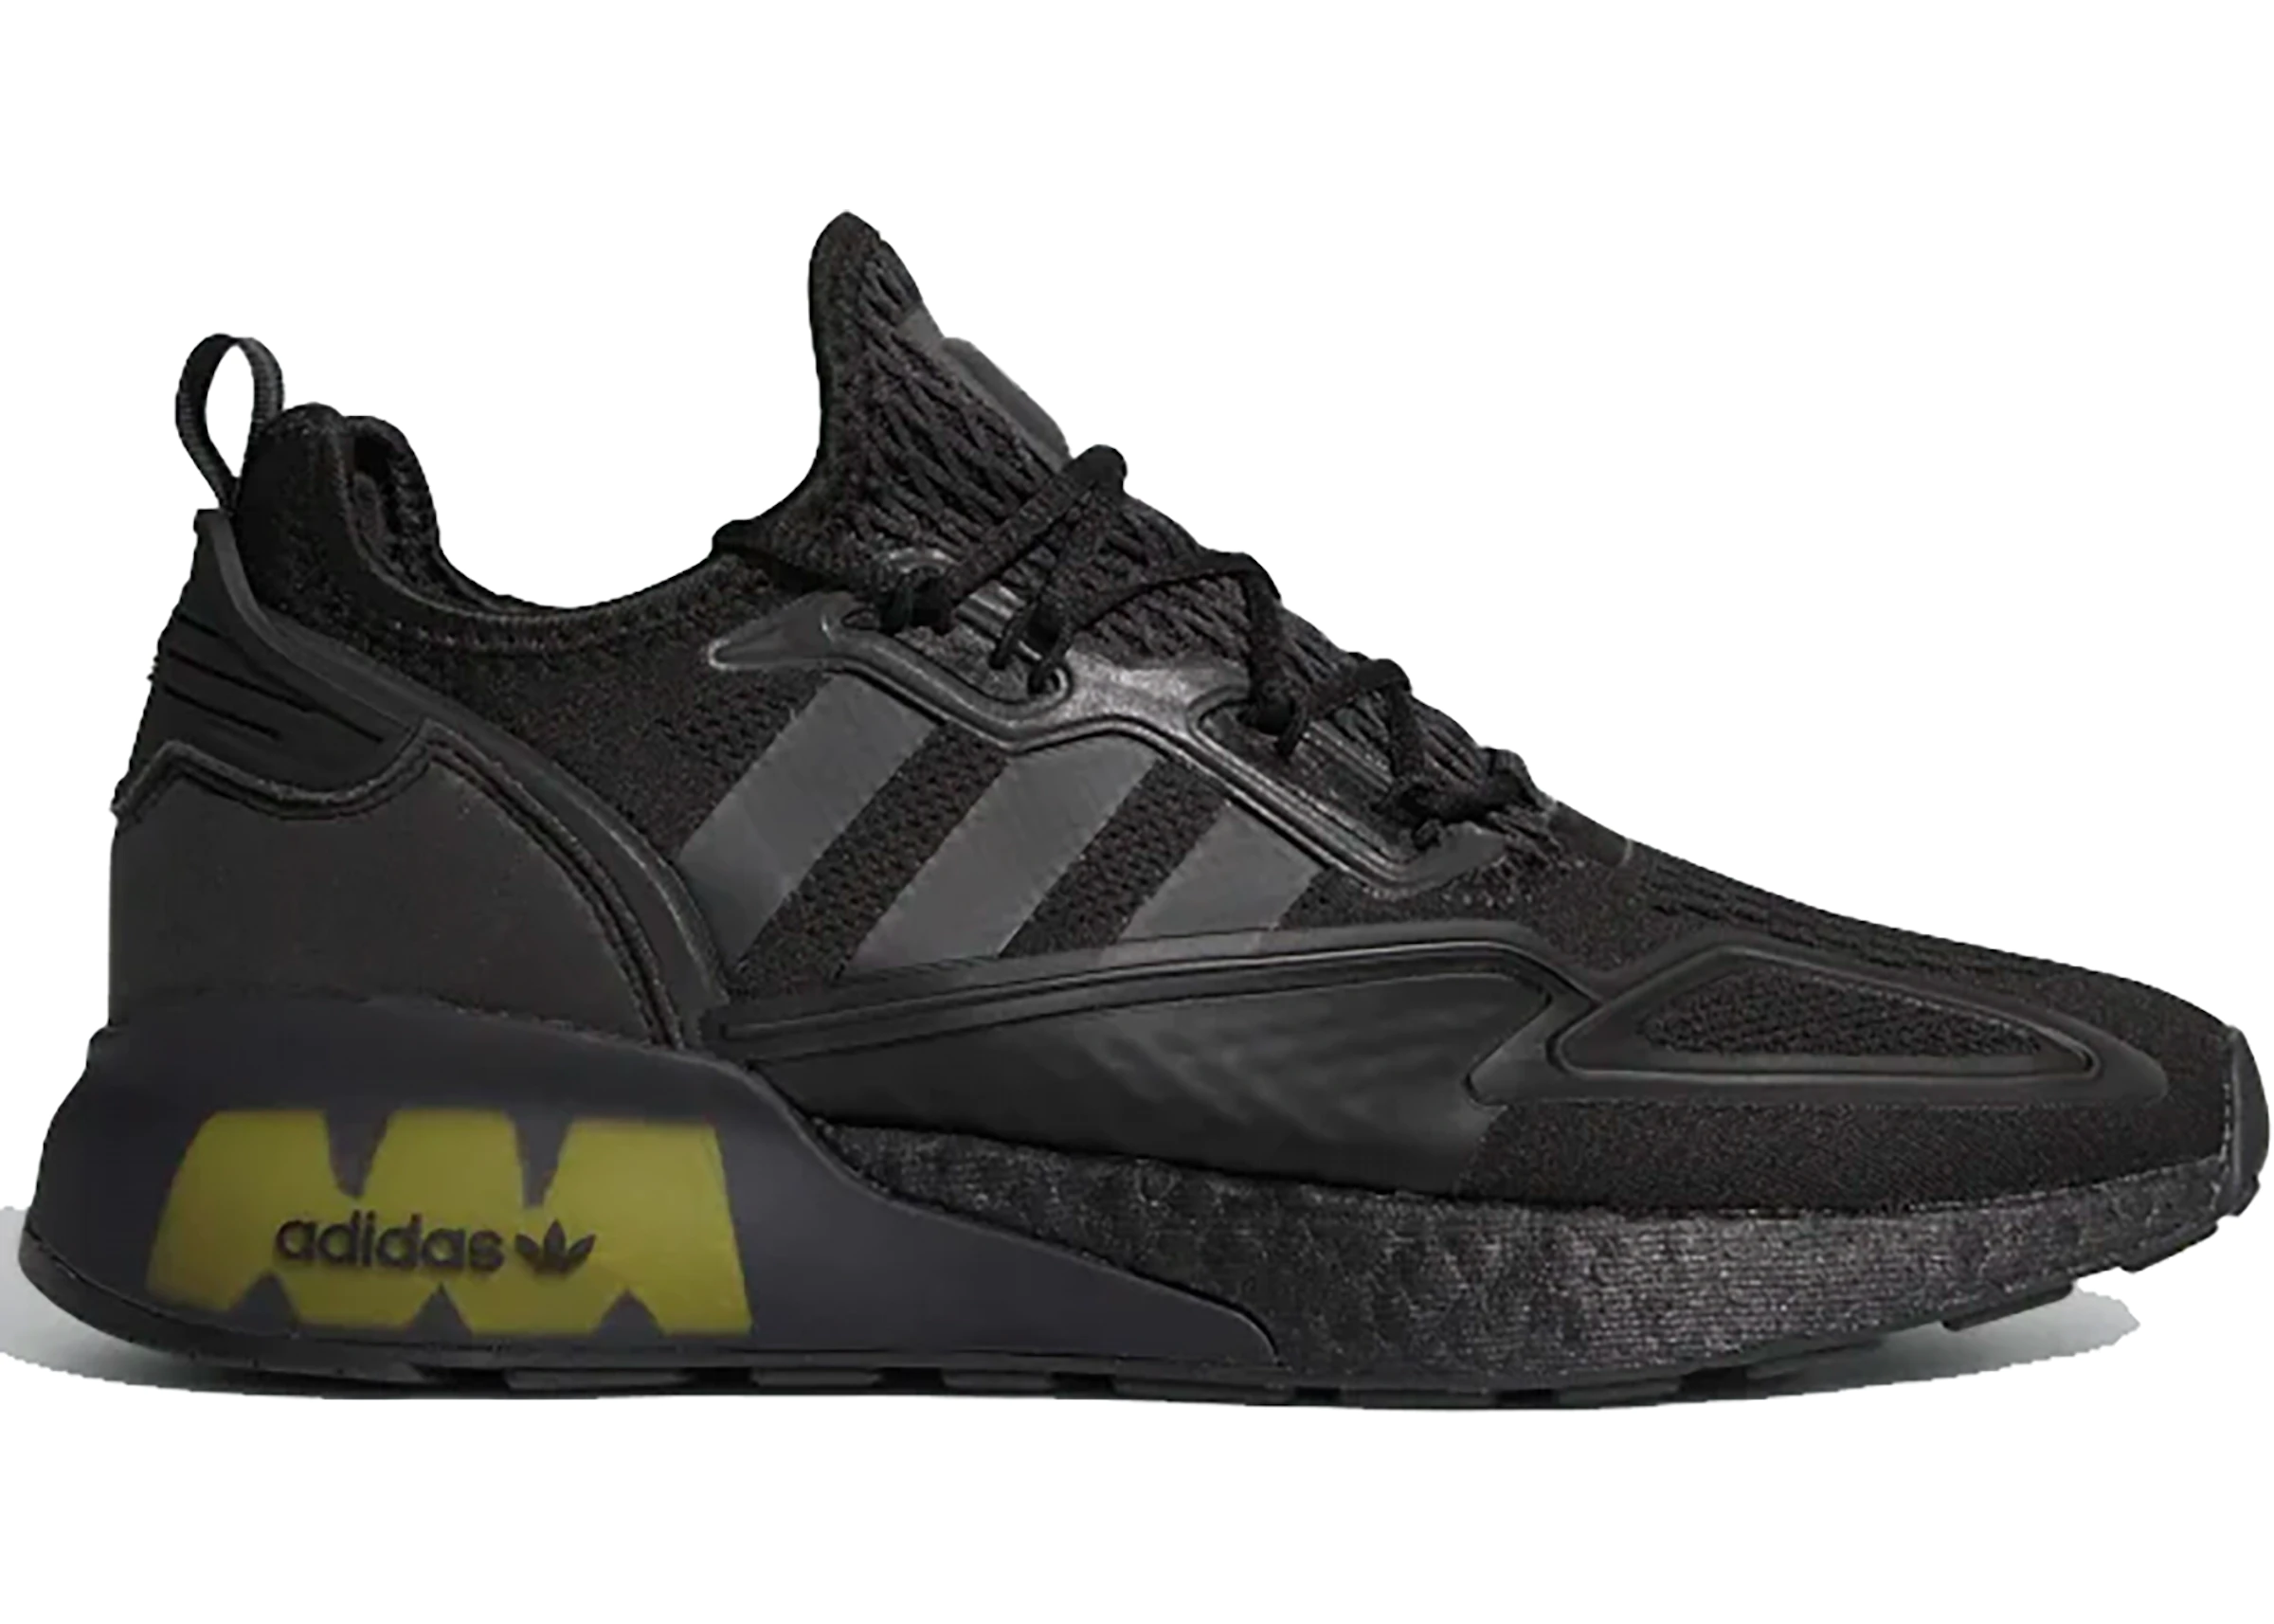 meer Titicaca Hoge blootstelling Zuidwest adidas ZX 2K Boost Core Black Solar Yellow - FV8453 - US